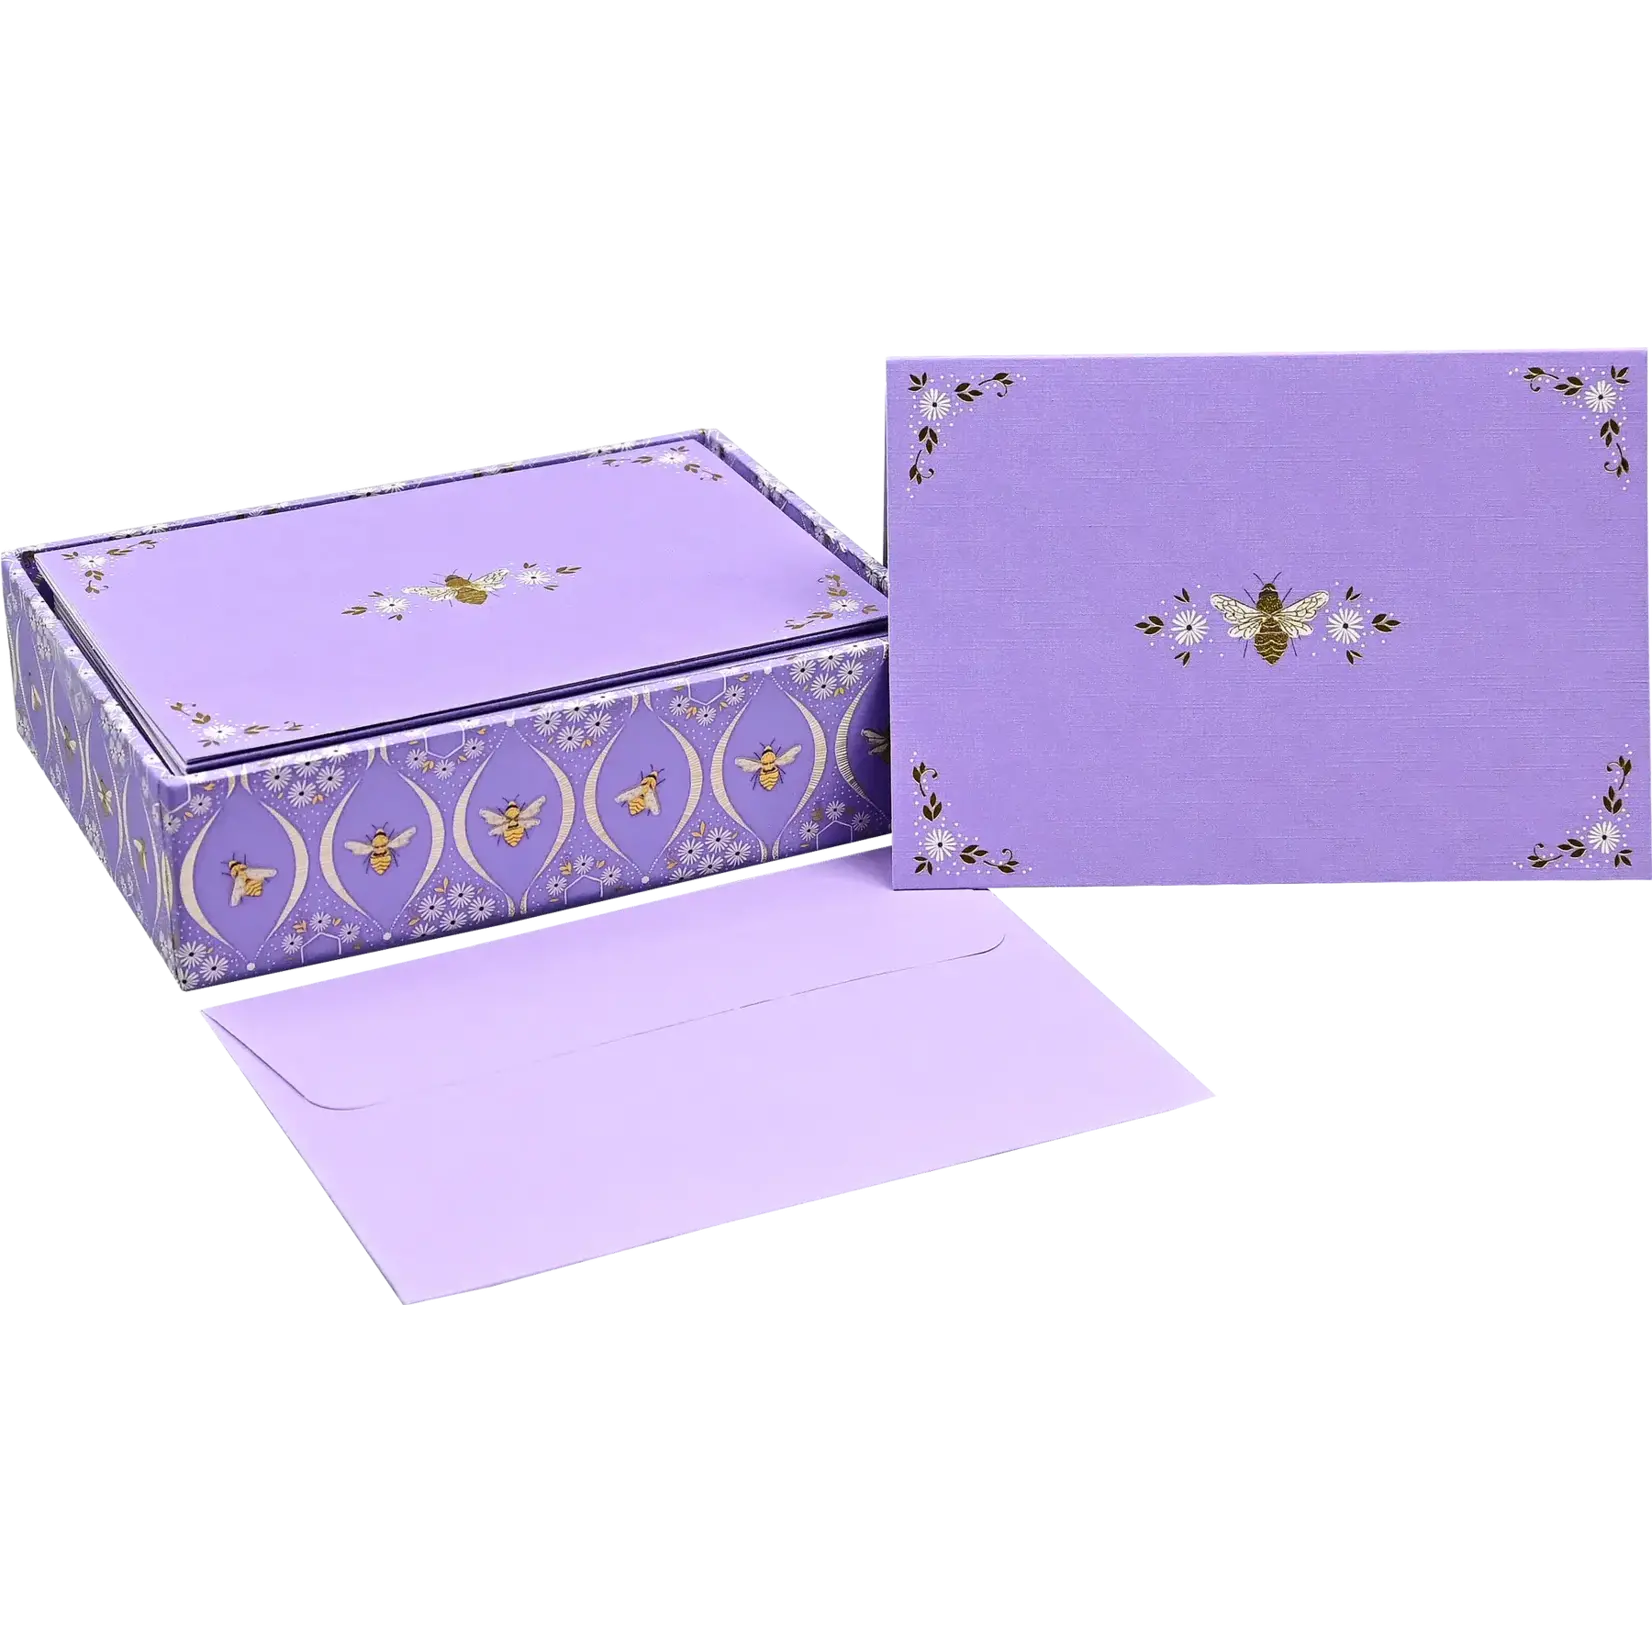 Peter Pauper Press Florentine Bees Boxed Note Cards